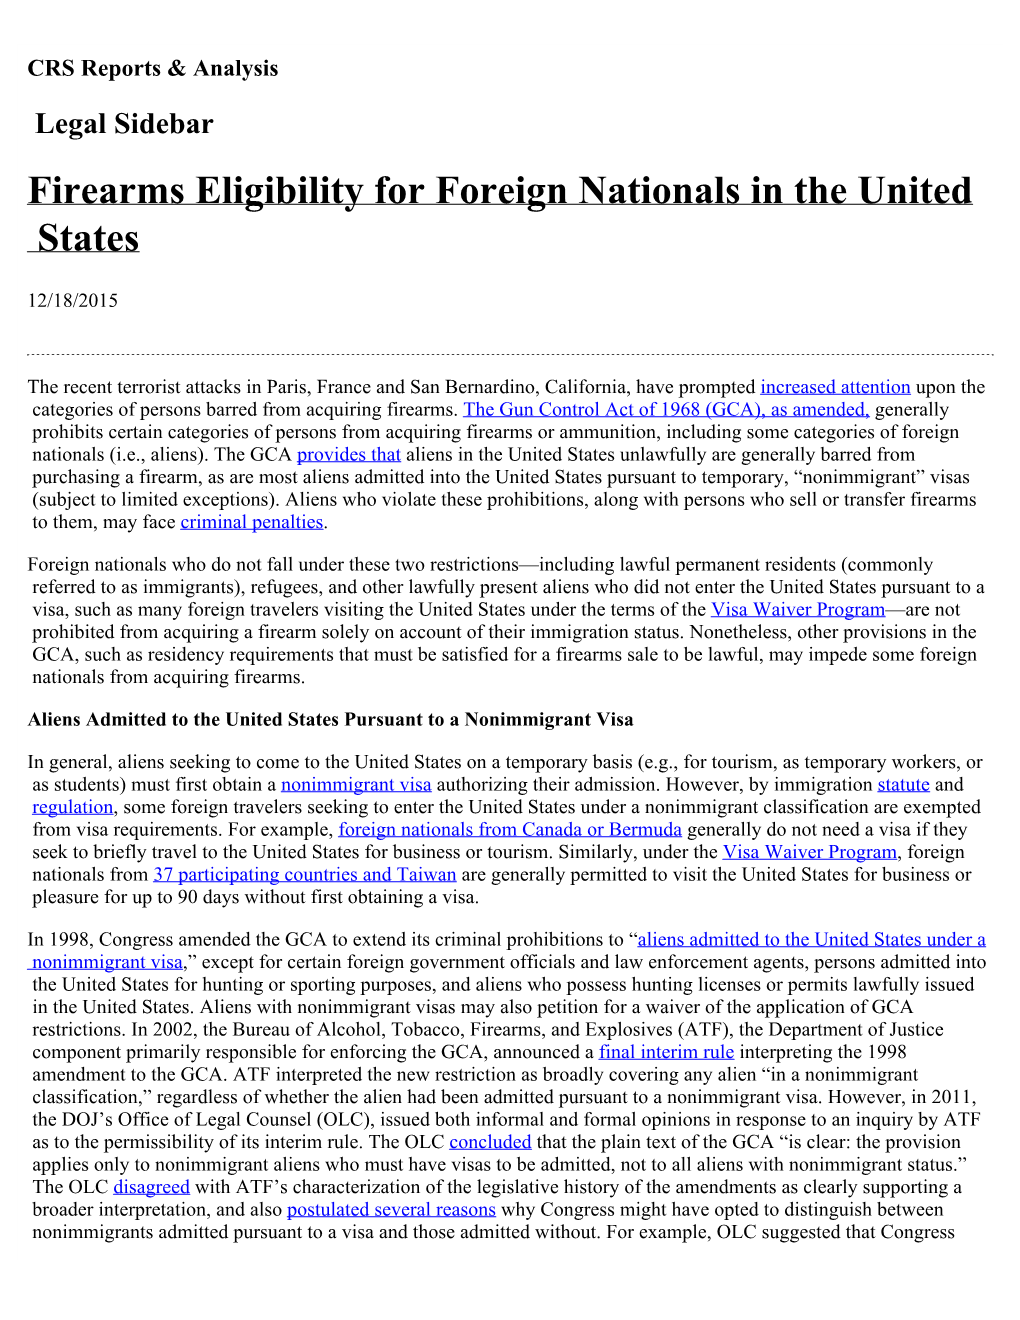 Firearms Eligibility for Foreign Nationals in the United States